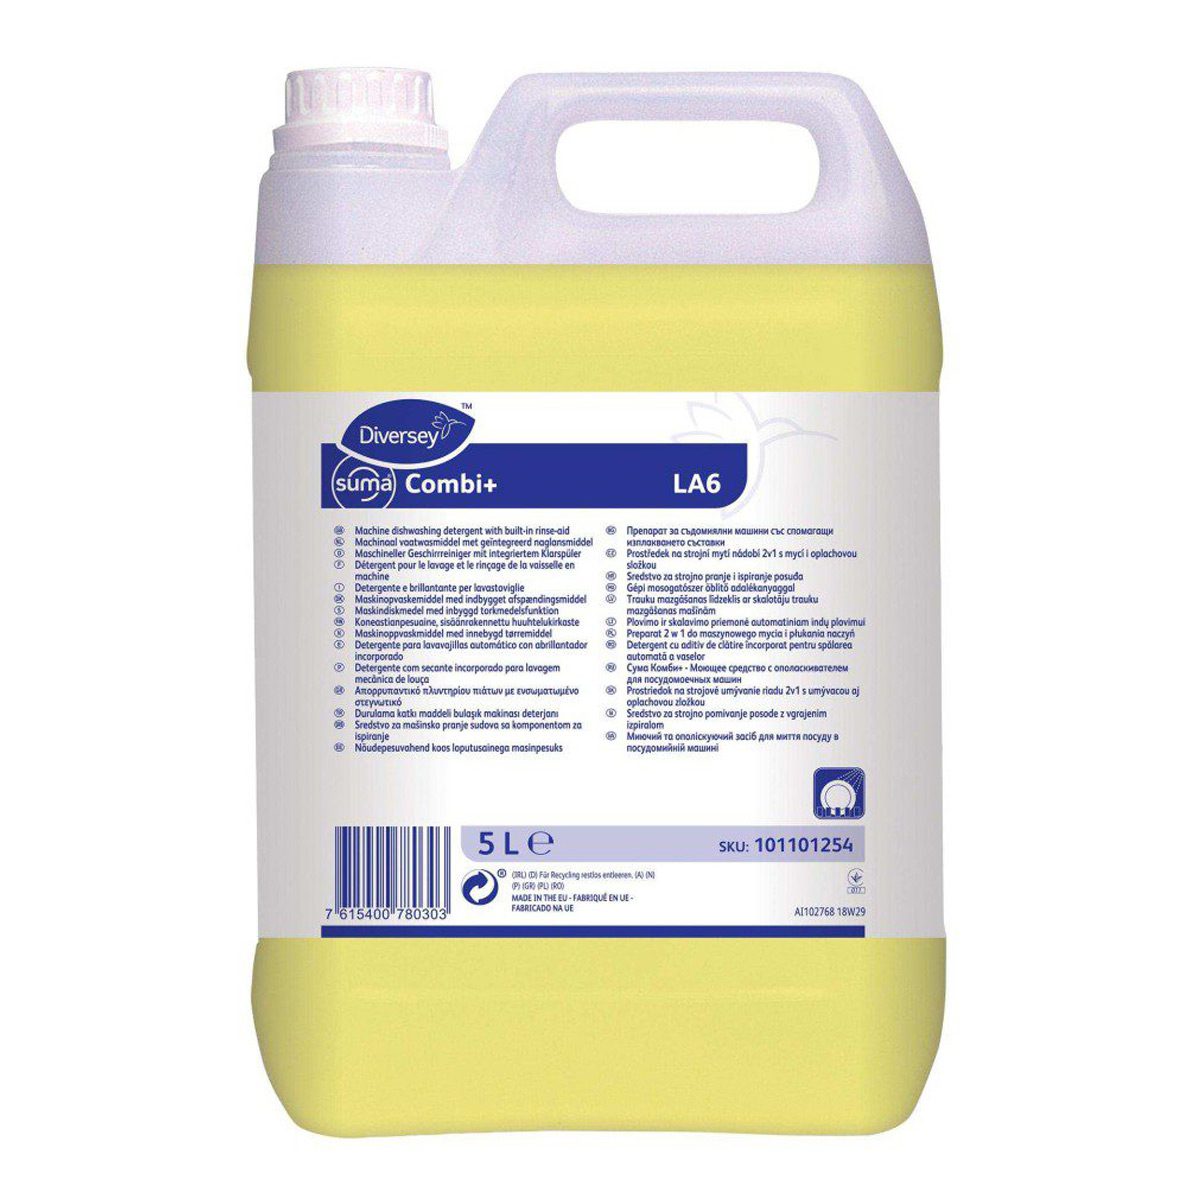 cleaning-products-kitchen-multipurpose-diversey-suma-combi-la6-5L-litre-easy-to-handle-reduces-packaging-waste-combined-detergent-and-rinse-aid-vjs-distributors-101101254